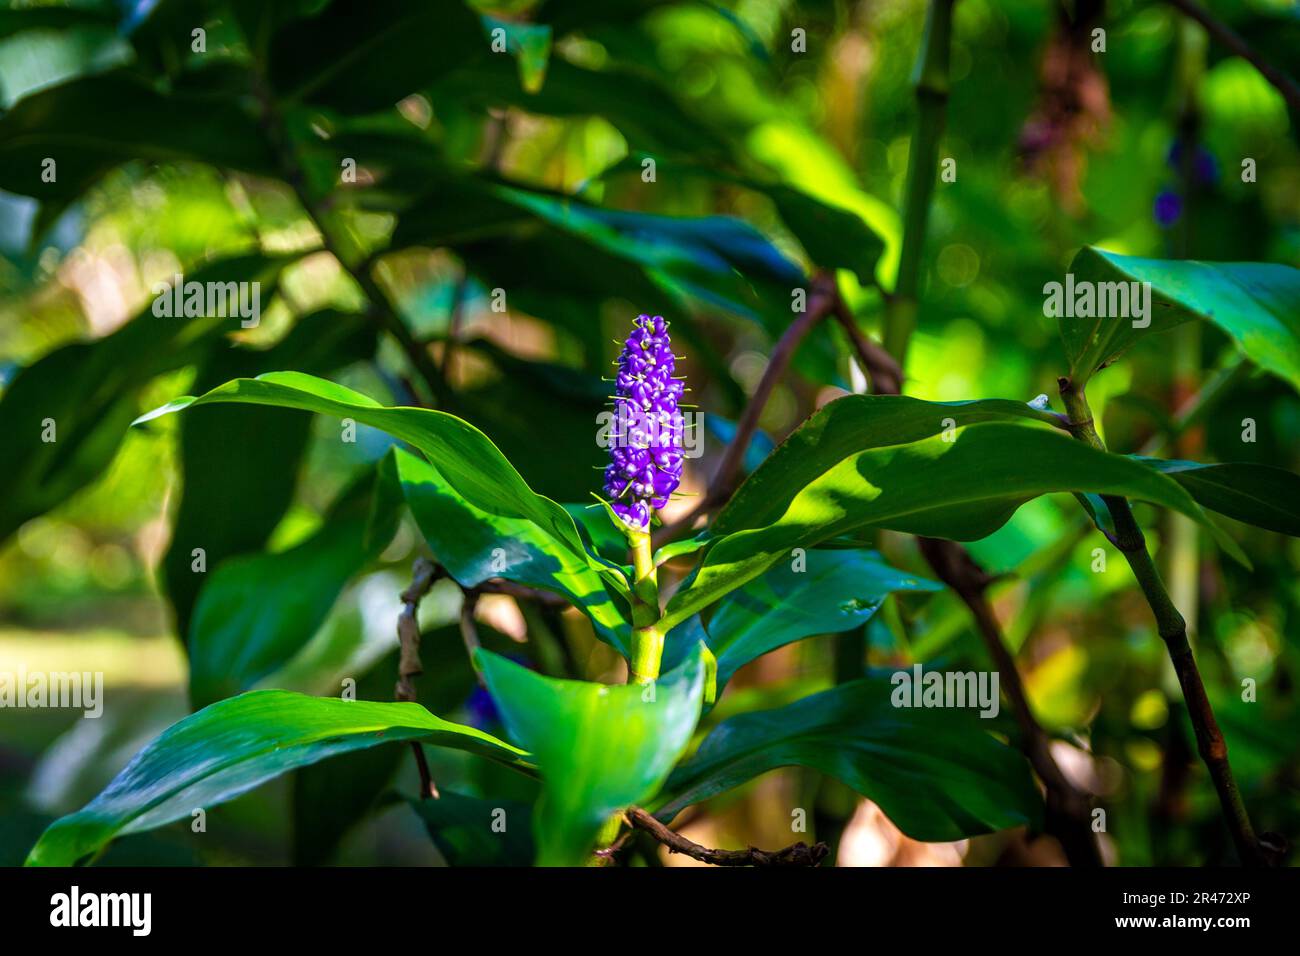 A blue ginger flower sirrounded by lush green leaves. Dichorisandra thyrsiflora. Hawaii. Stock Photo